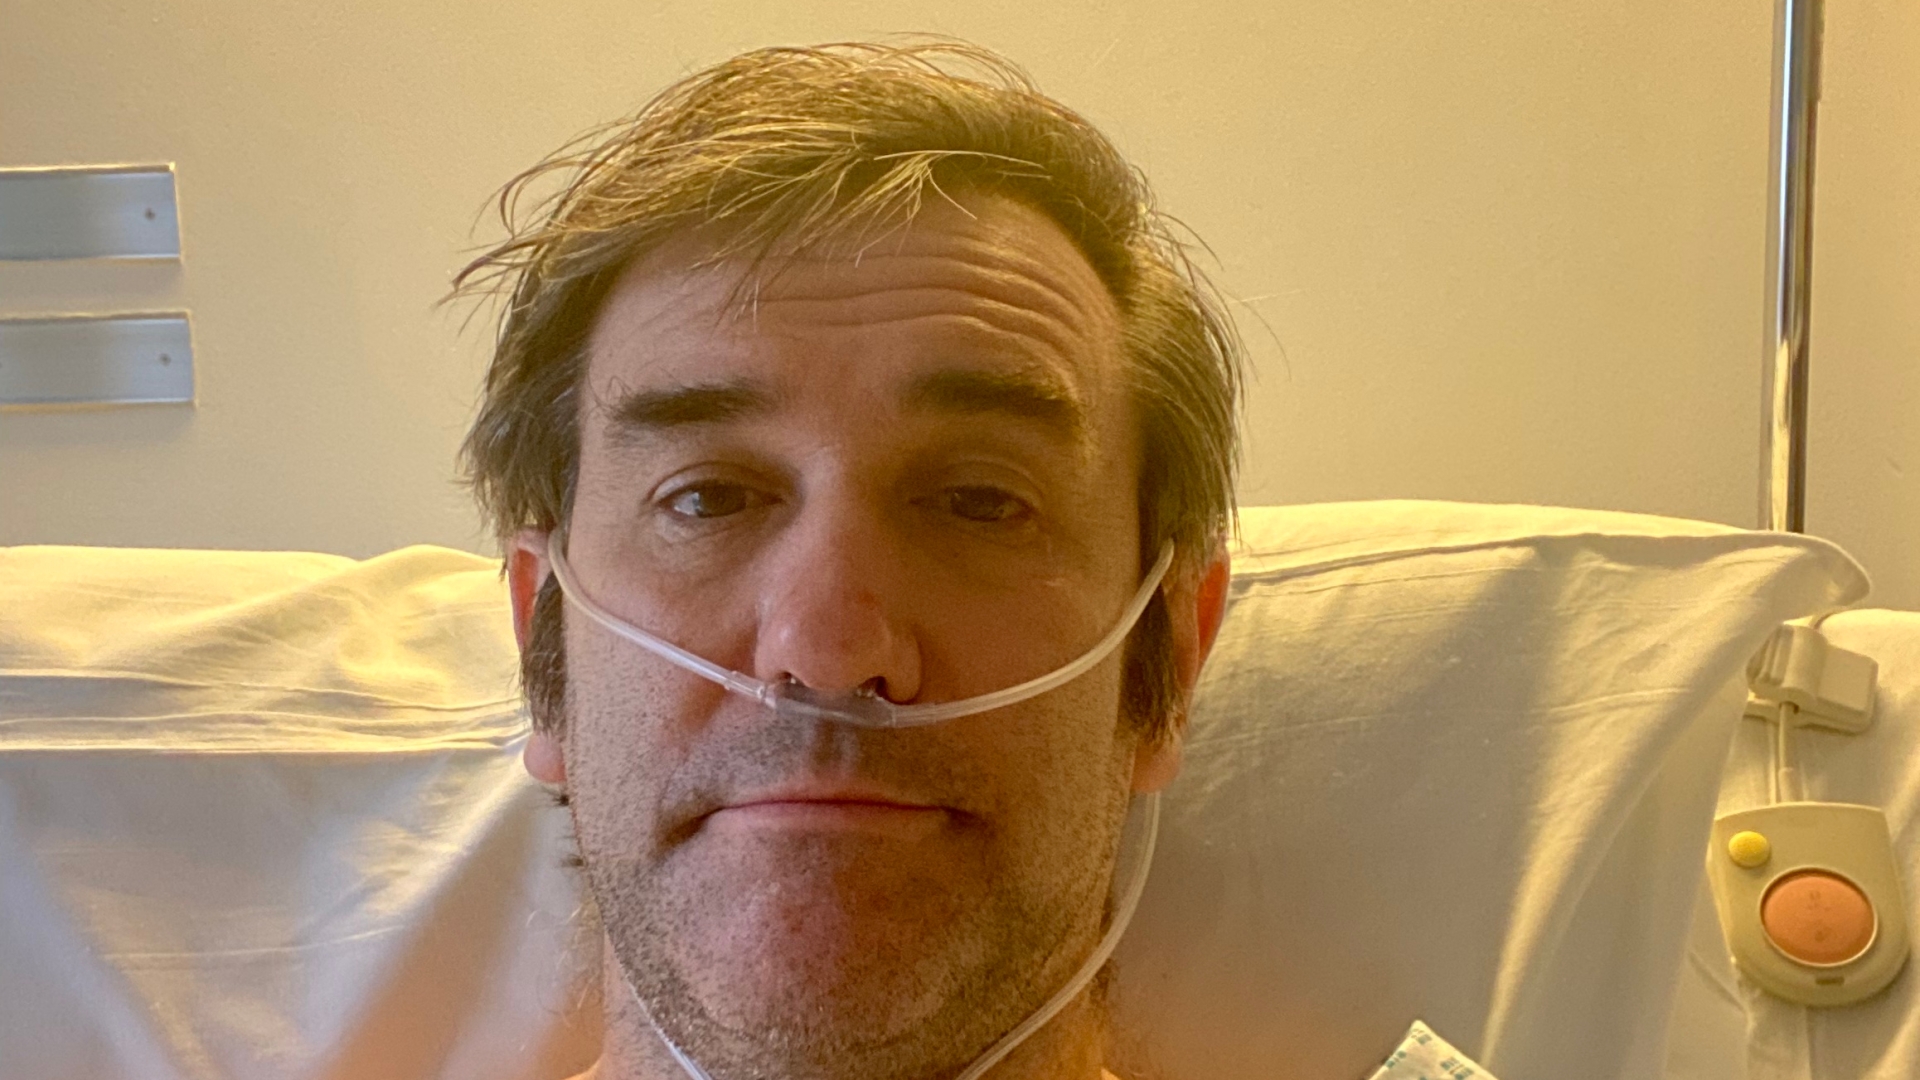 Liam Gallagher, you won't live forever - just have the hip op like I did